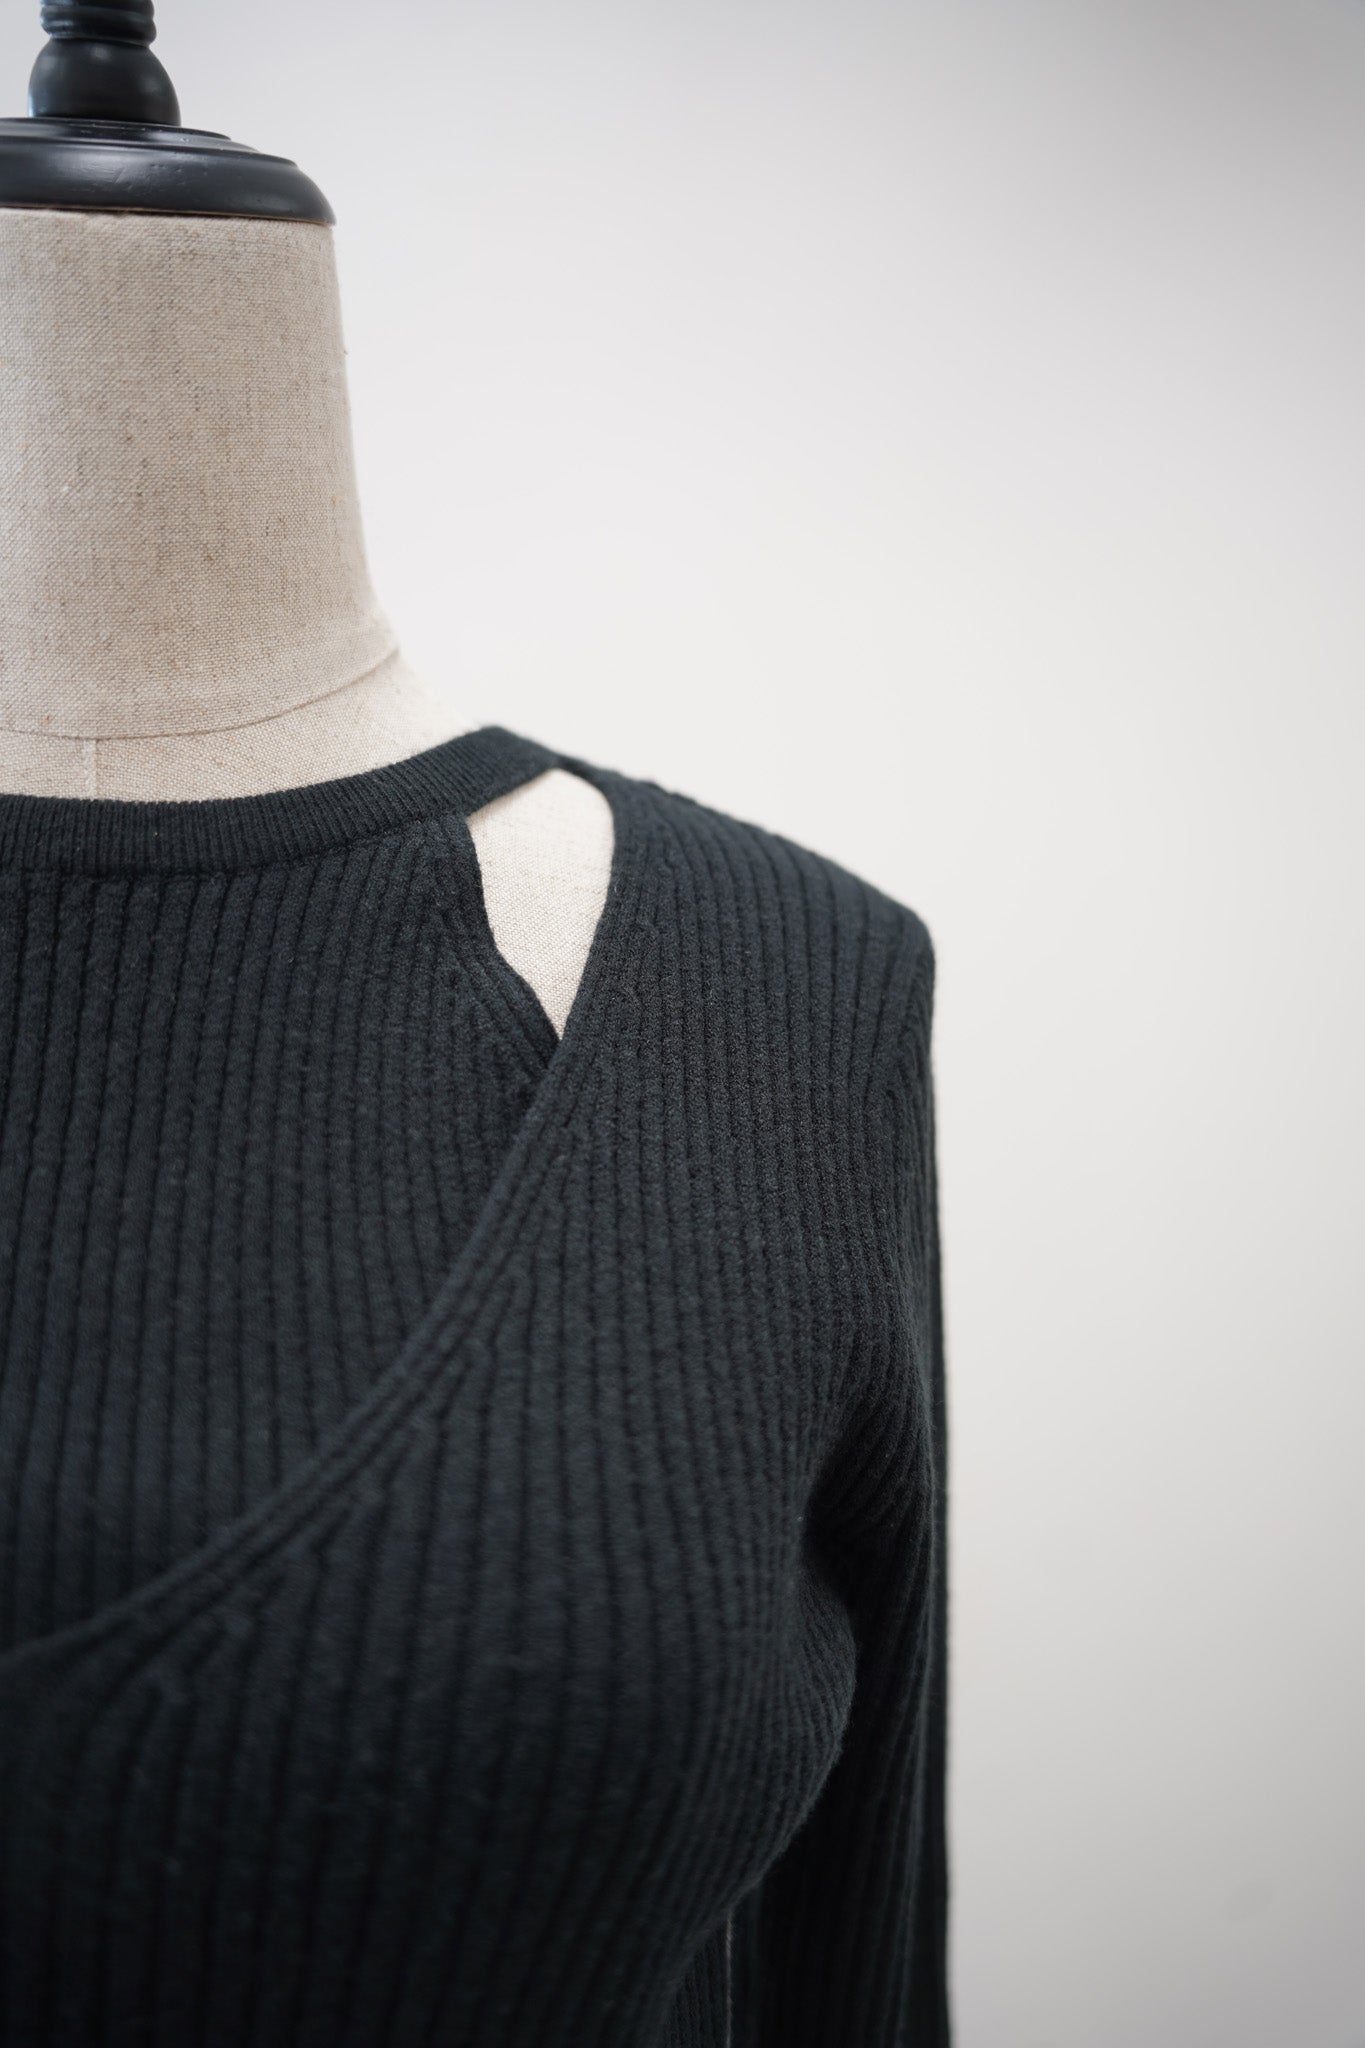 Layered design knit tops